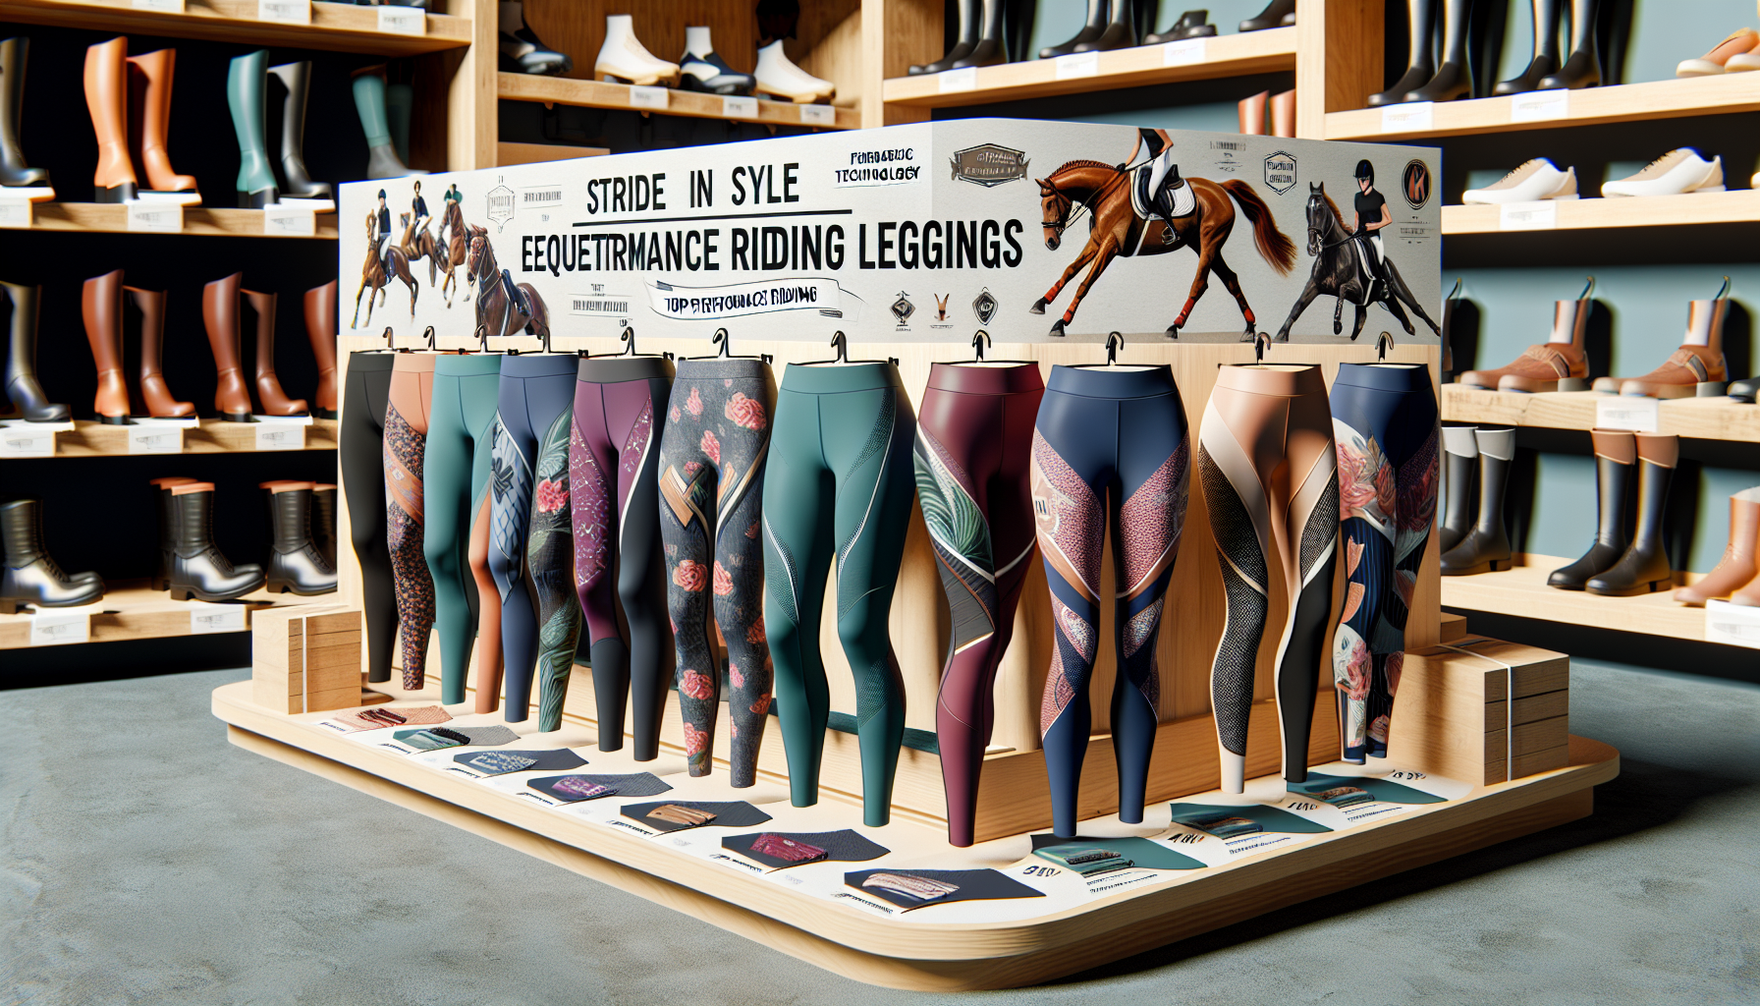 Visualize a store shelf showcasing an array of high-performance equestrian riding leggings. They are designed in vibrant hues, featuring advanced fabric technology for ideal comfort and stretch. They 